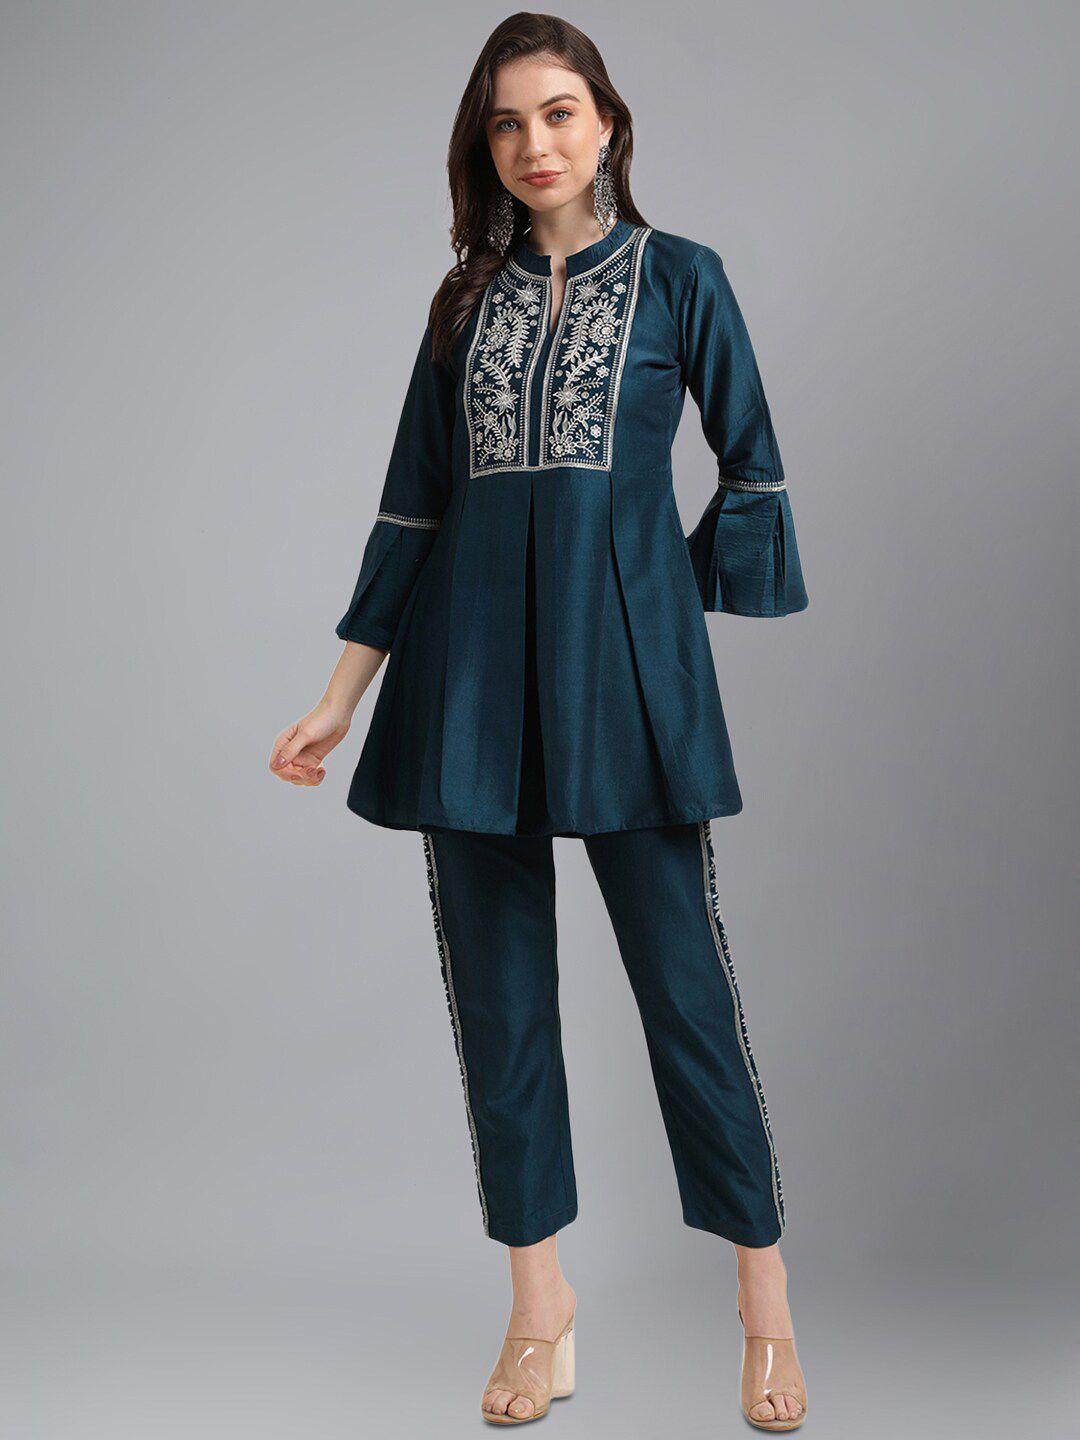 kalini embroidered mandarin collar top with trousers